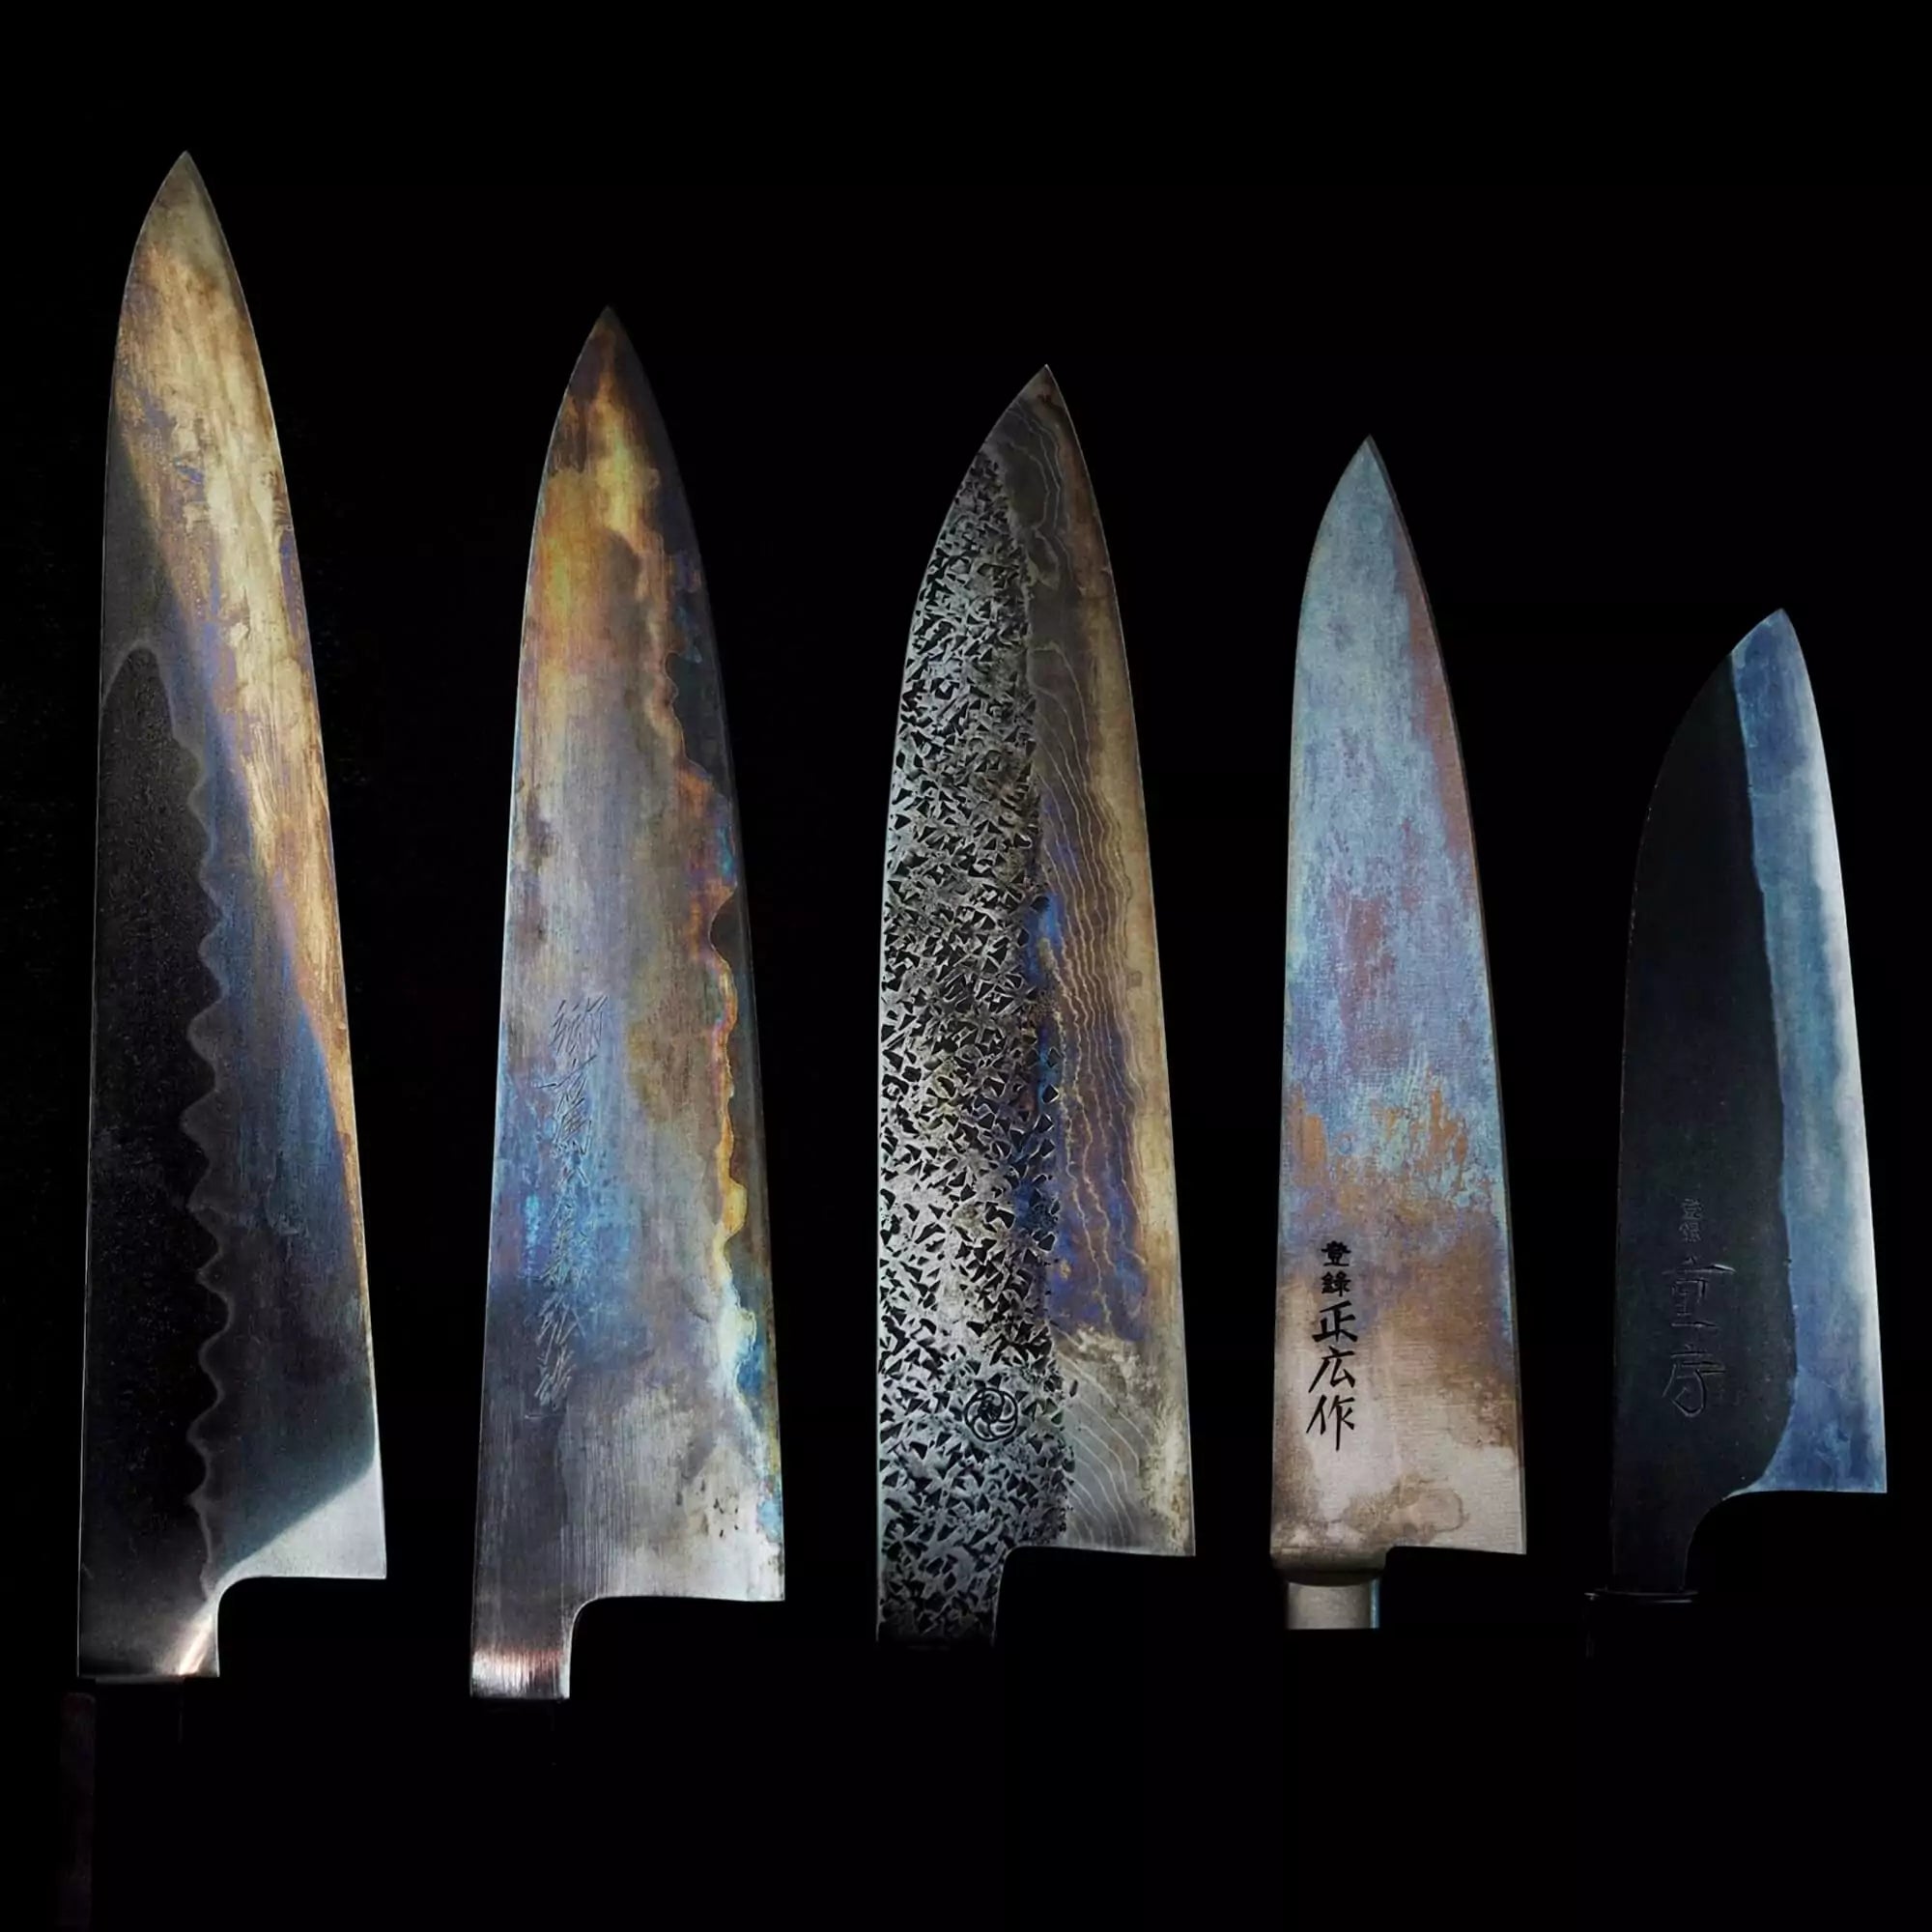 Five Japanese knives lined up against a dark background, each showcasing distinct patina.